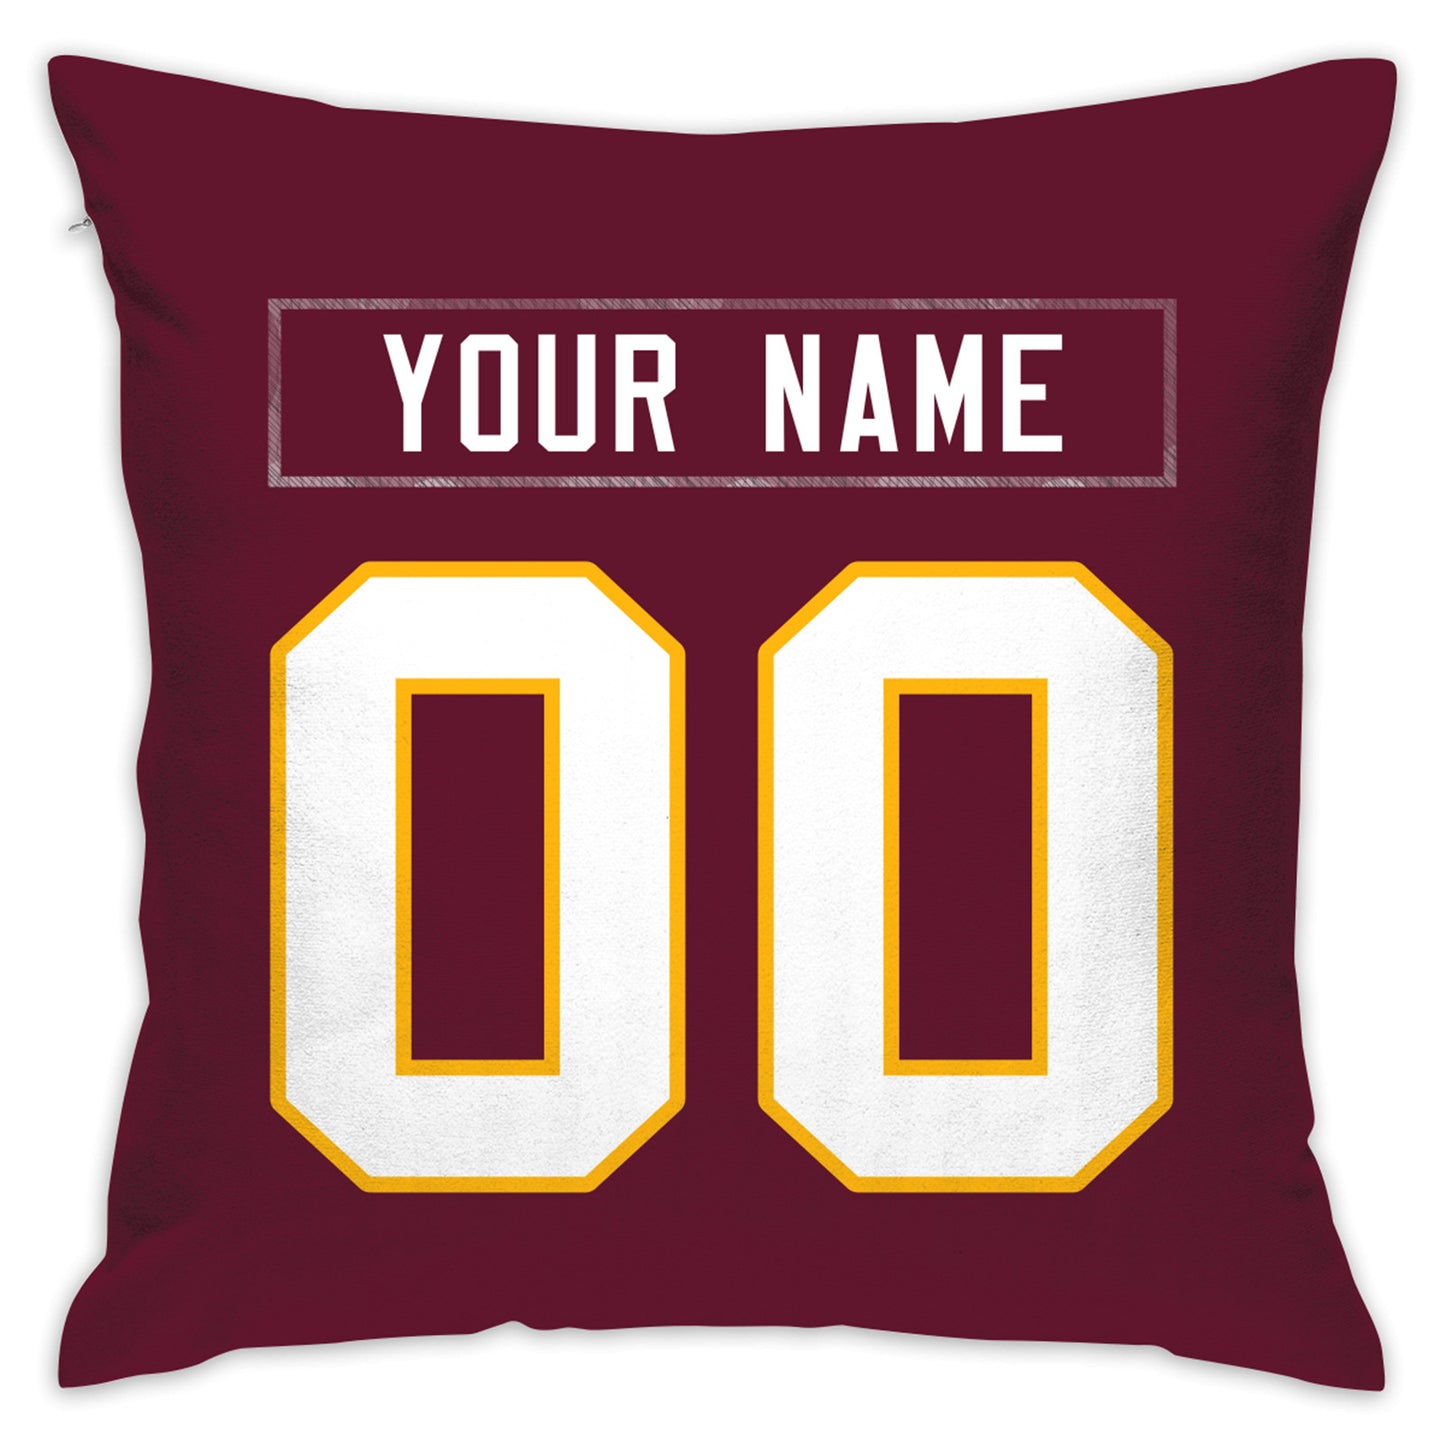 Custom Washington Football Team Decorative Throw Pillow Cover 18" x 18"- Print Personalized Style Customizable Design Team Any Name & Number